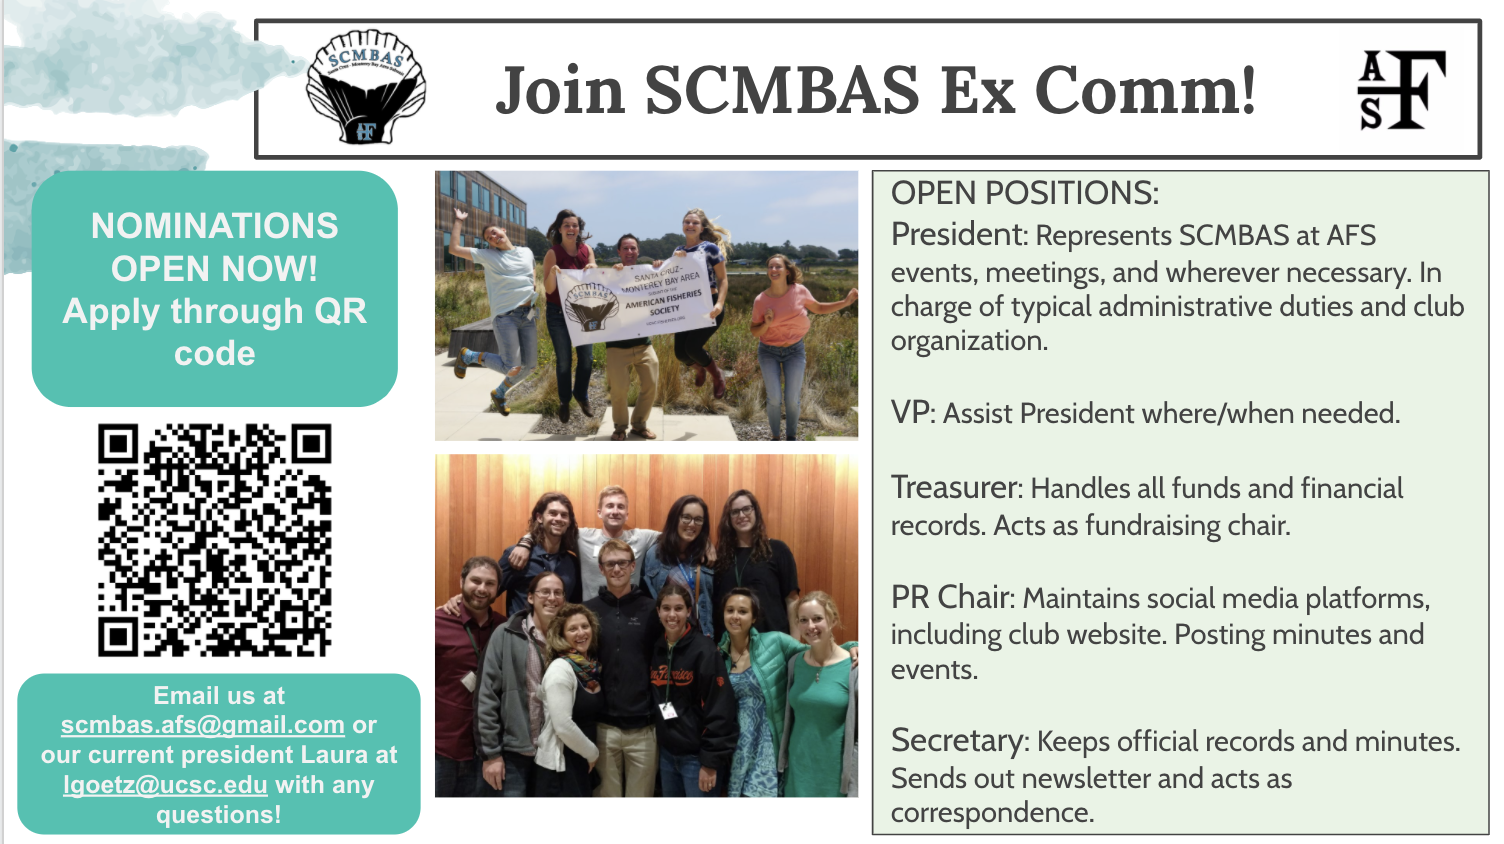 Do you want to join our Executive Committee?